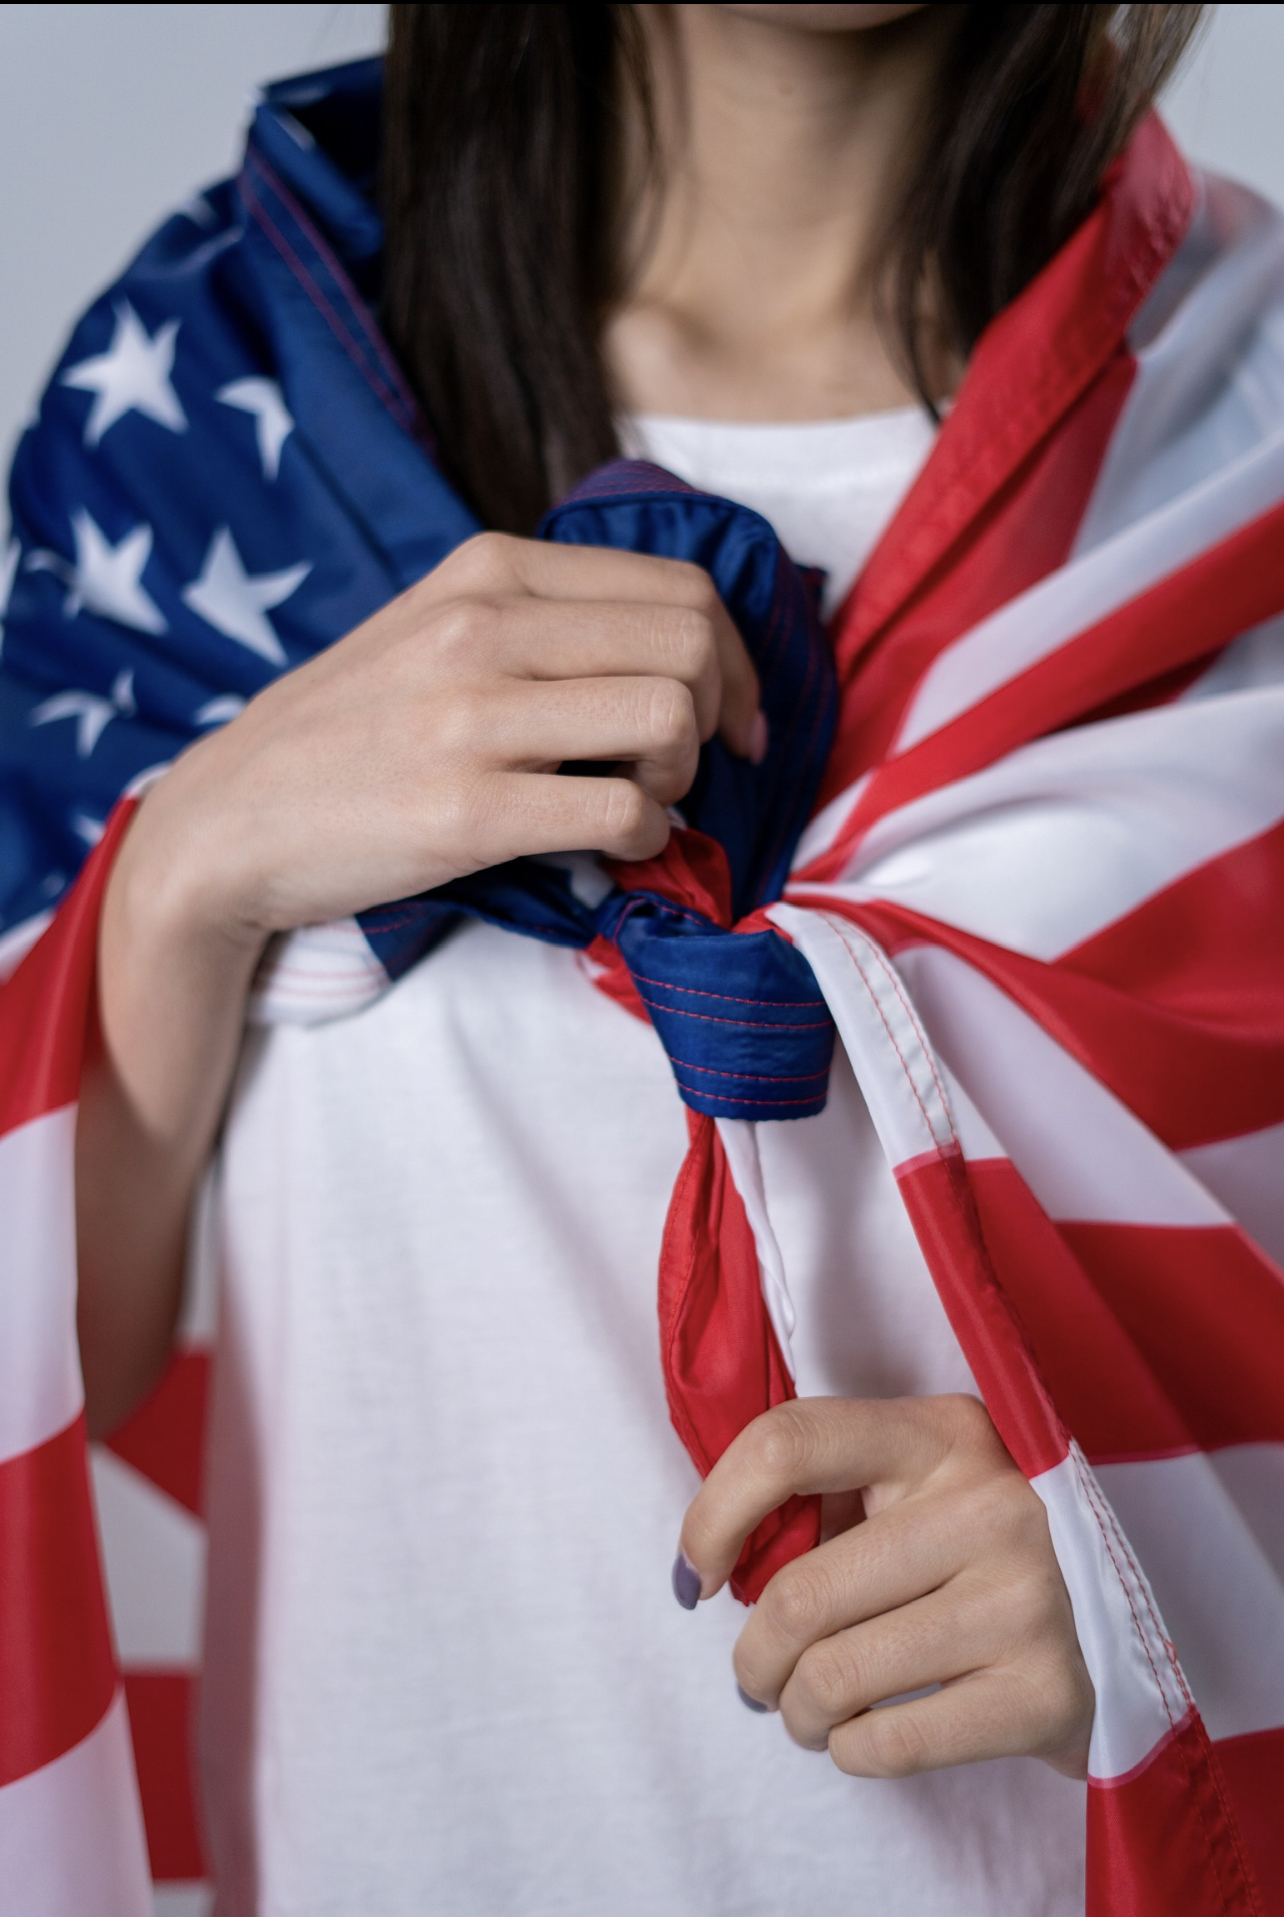 How to Apply for a Student Visa in the USA – Requirements, Processing Time & Cost